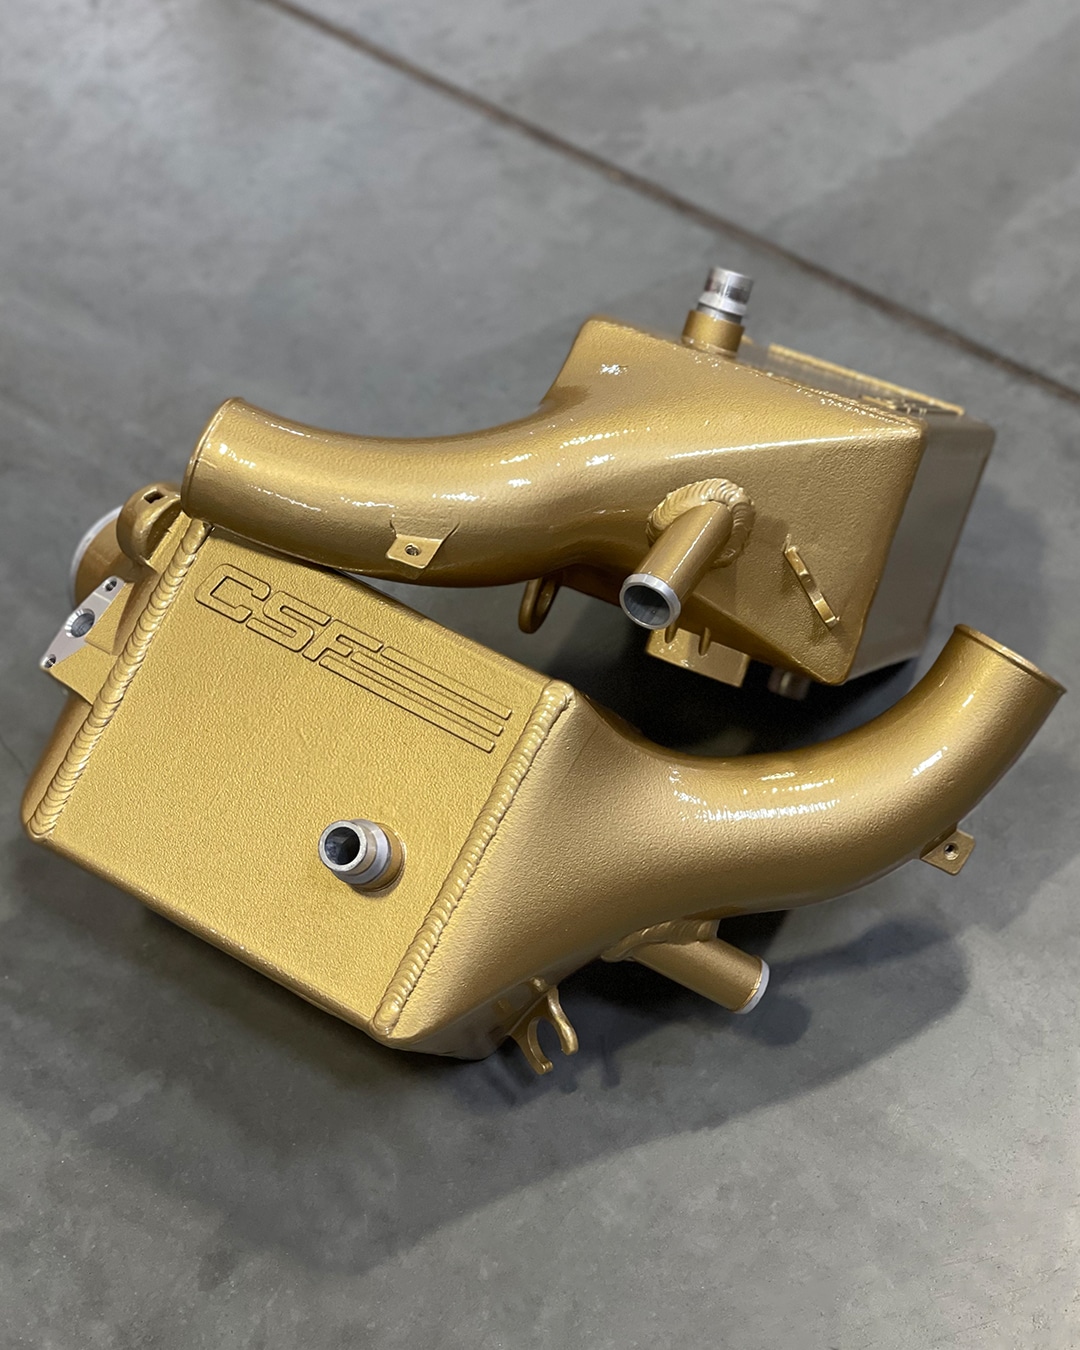 F90 M5 & F92 M8 High-Performance Charge Coolers in custom BMW M Carbon Cermaic Gold Color Match